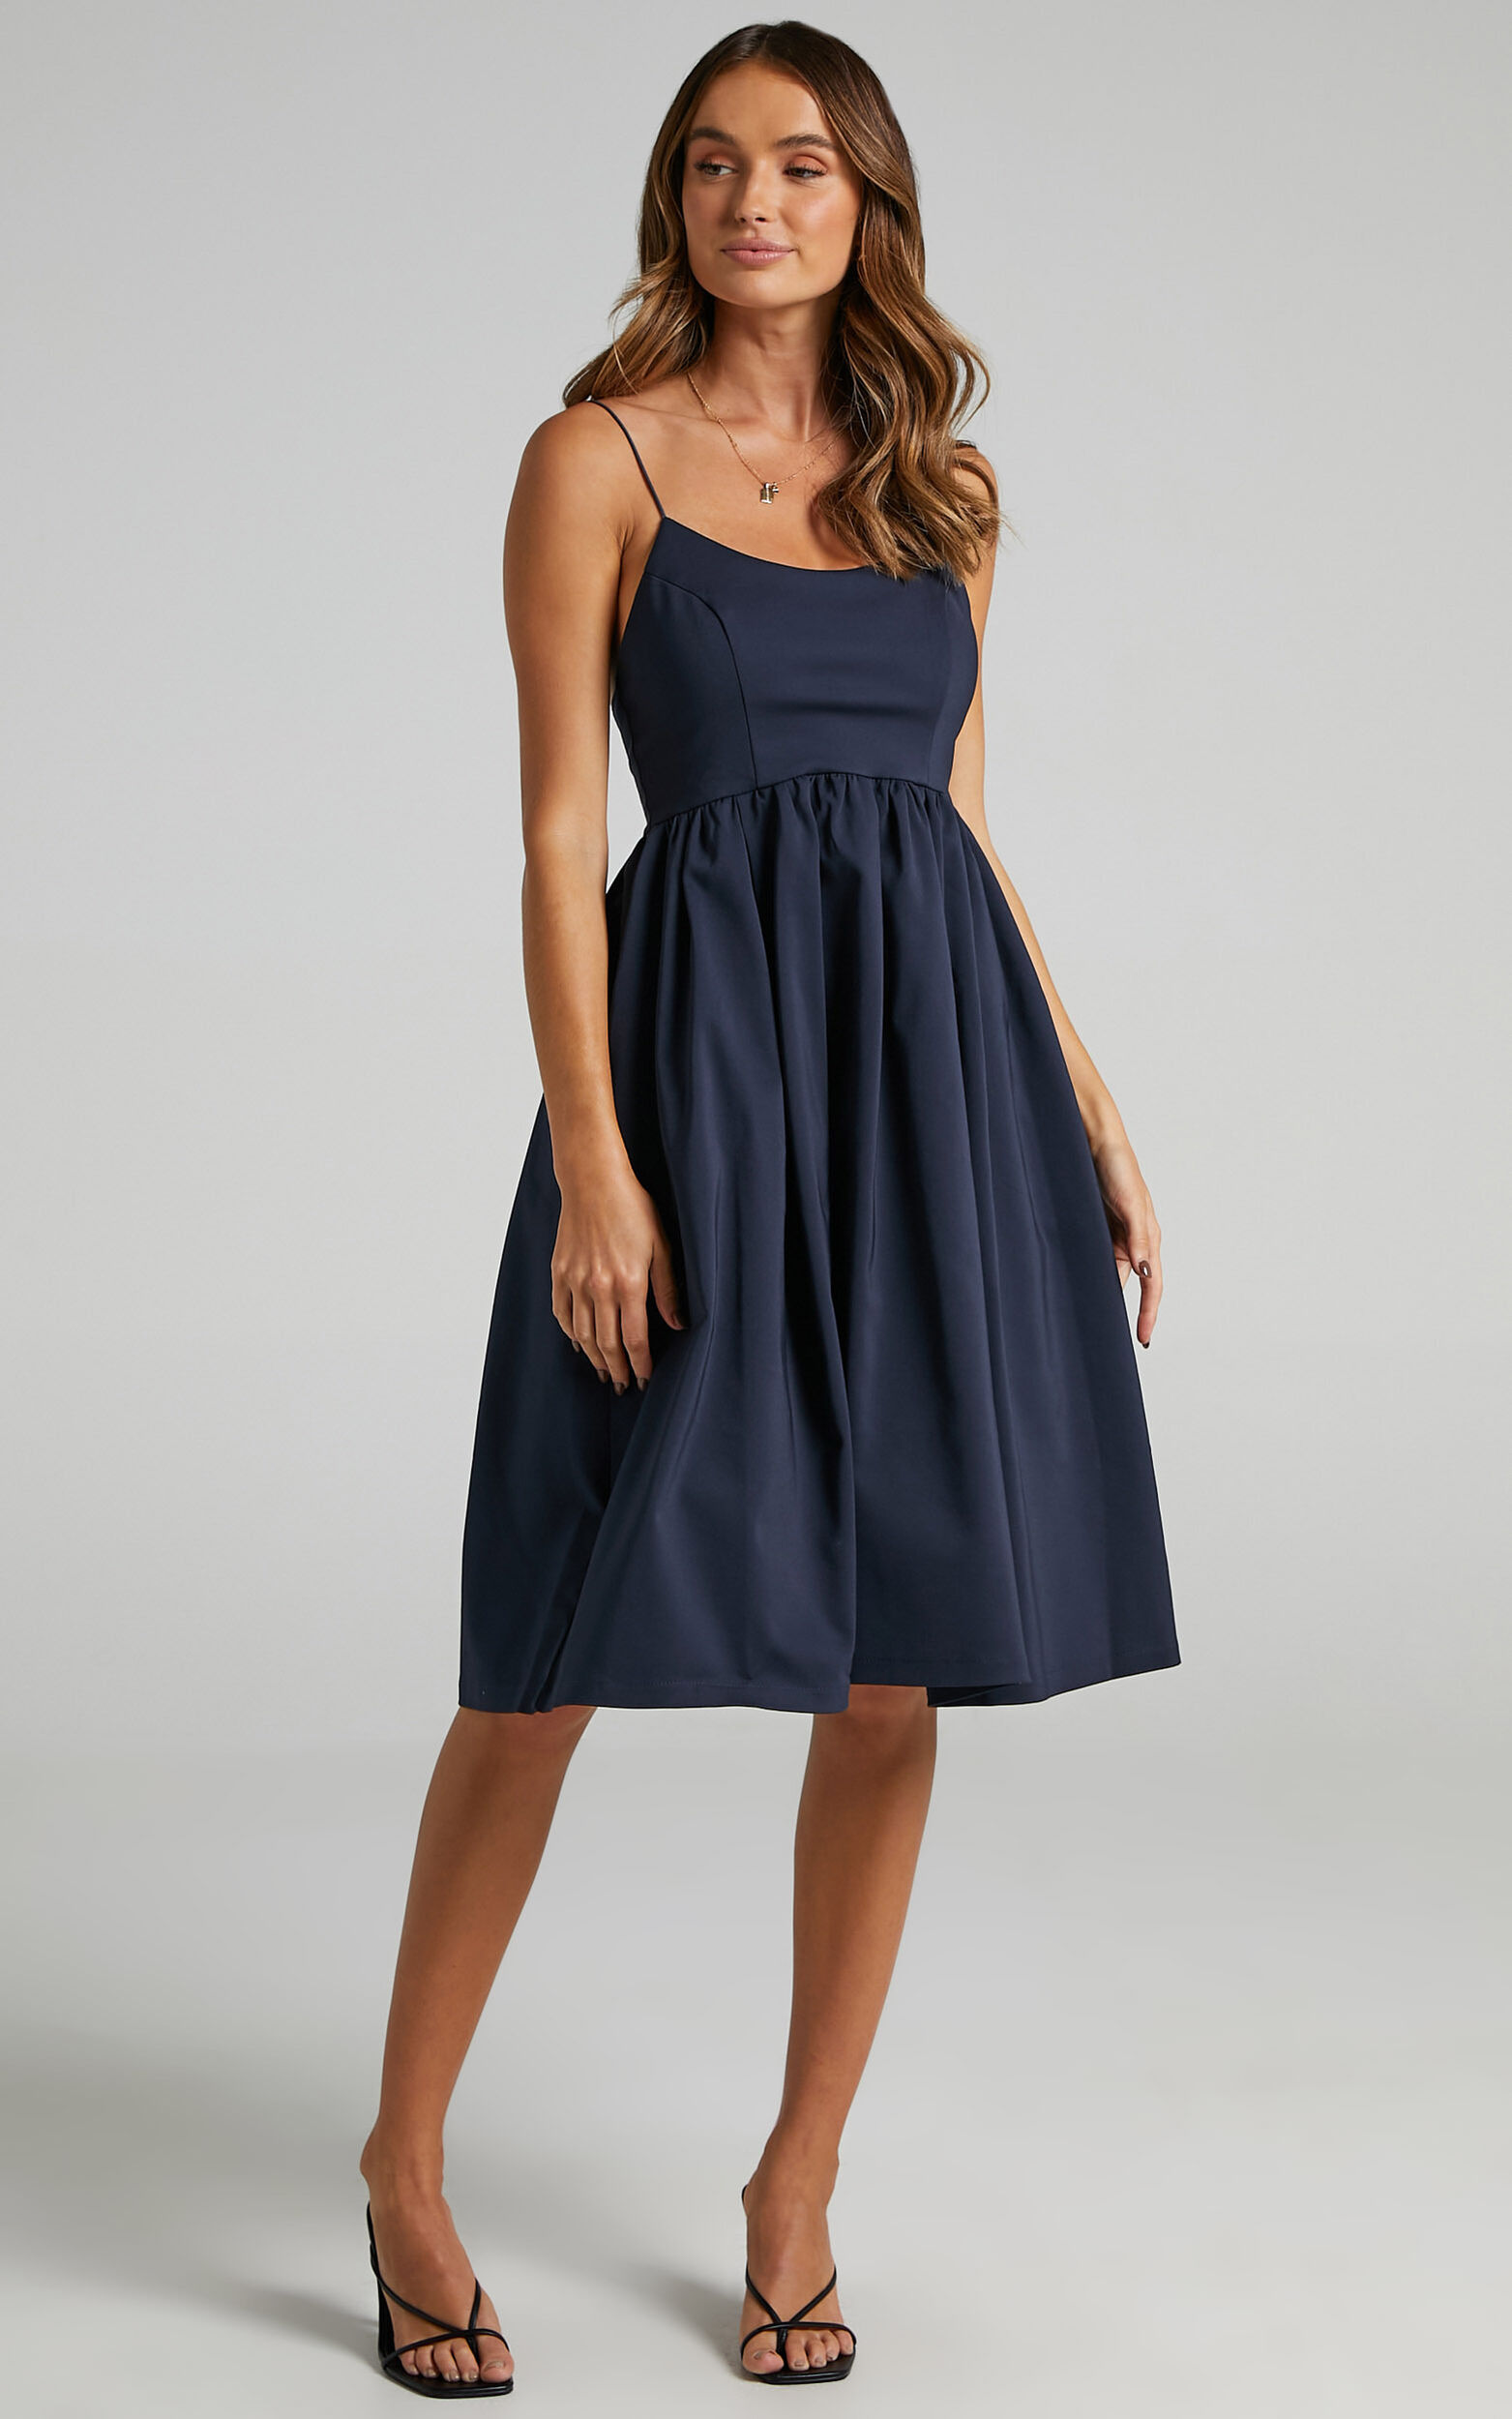 Wild Nights A-line Spaghetti Strap Dress in Navy - 06, NVY3